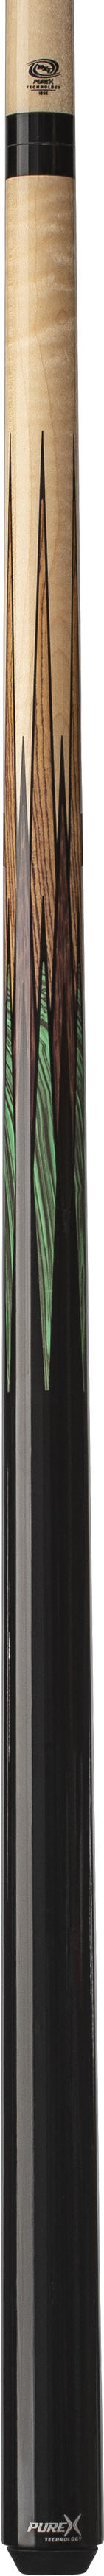 Players HXT-SN2 Pool Cue